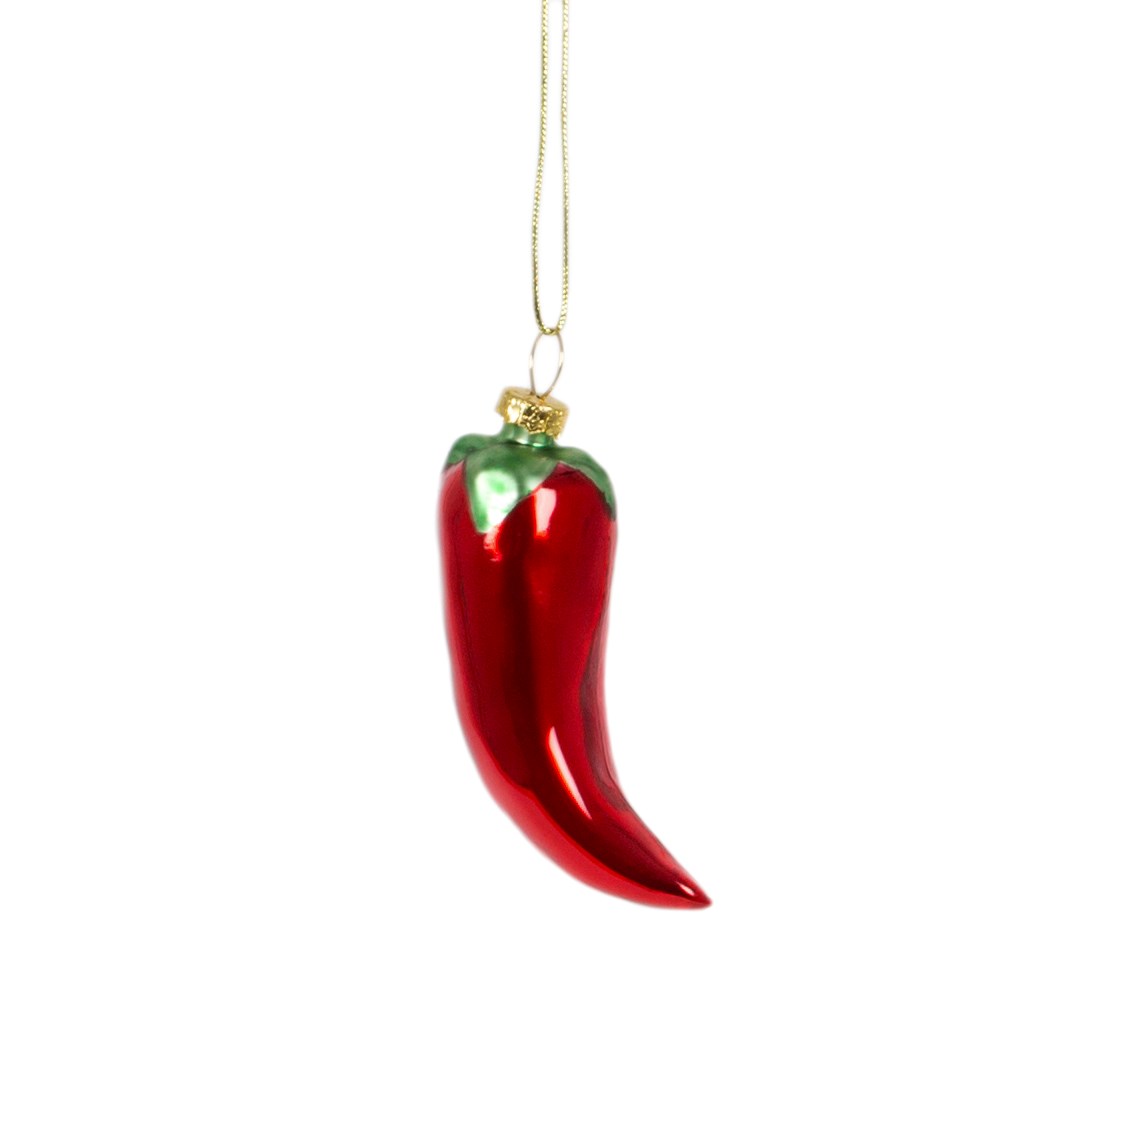 Get your taste buds going with this hot and spicy red and green Mexican style chilli pepper! This bauble is made from glass and has a string thread to hang from your tree or around your home.